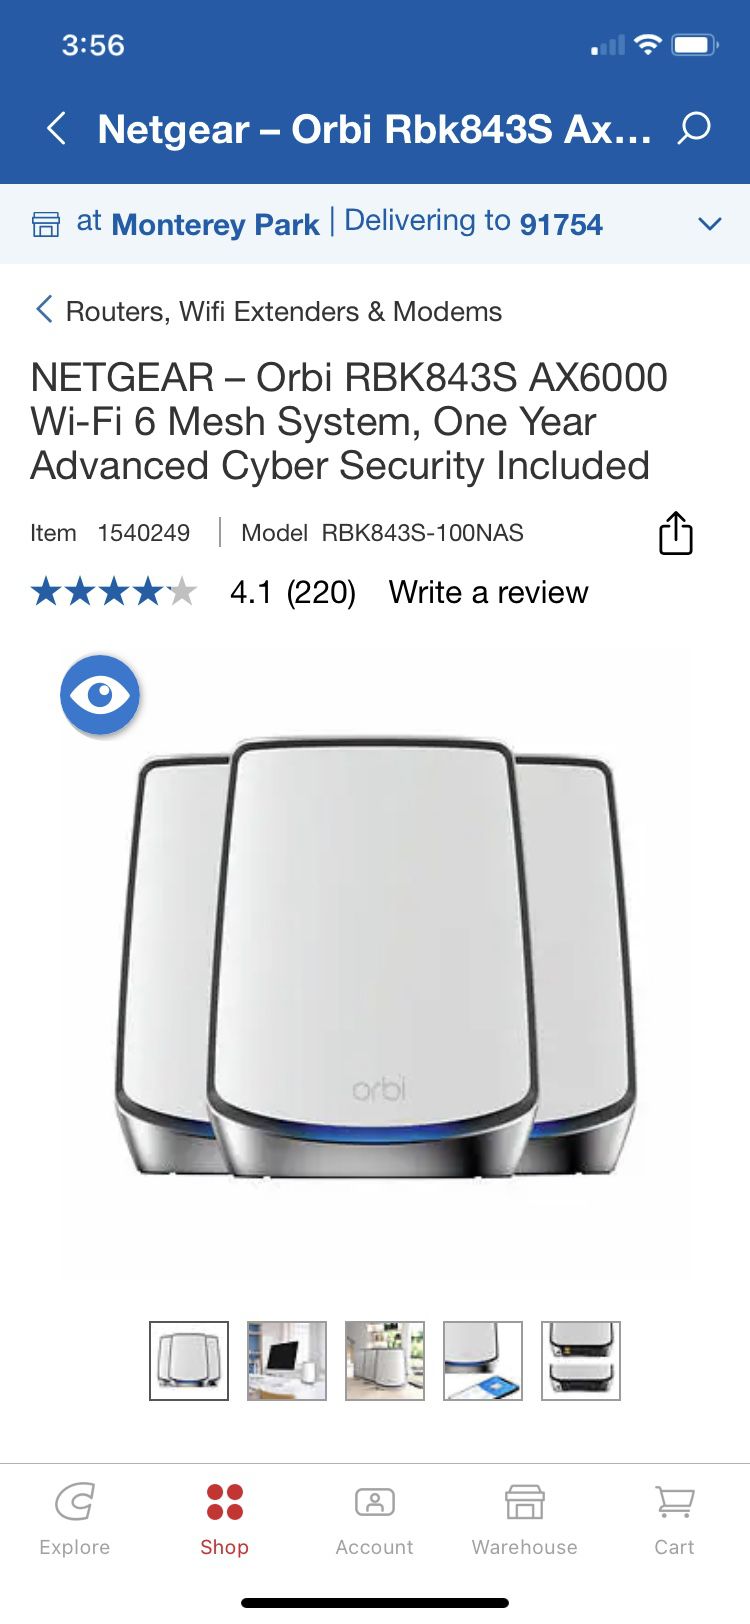 NEW NETGEAR – Orbi RBK843S AX6000 Wi-Fi 6 Mesh System, One Year Advanced Cyber Security Included